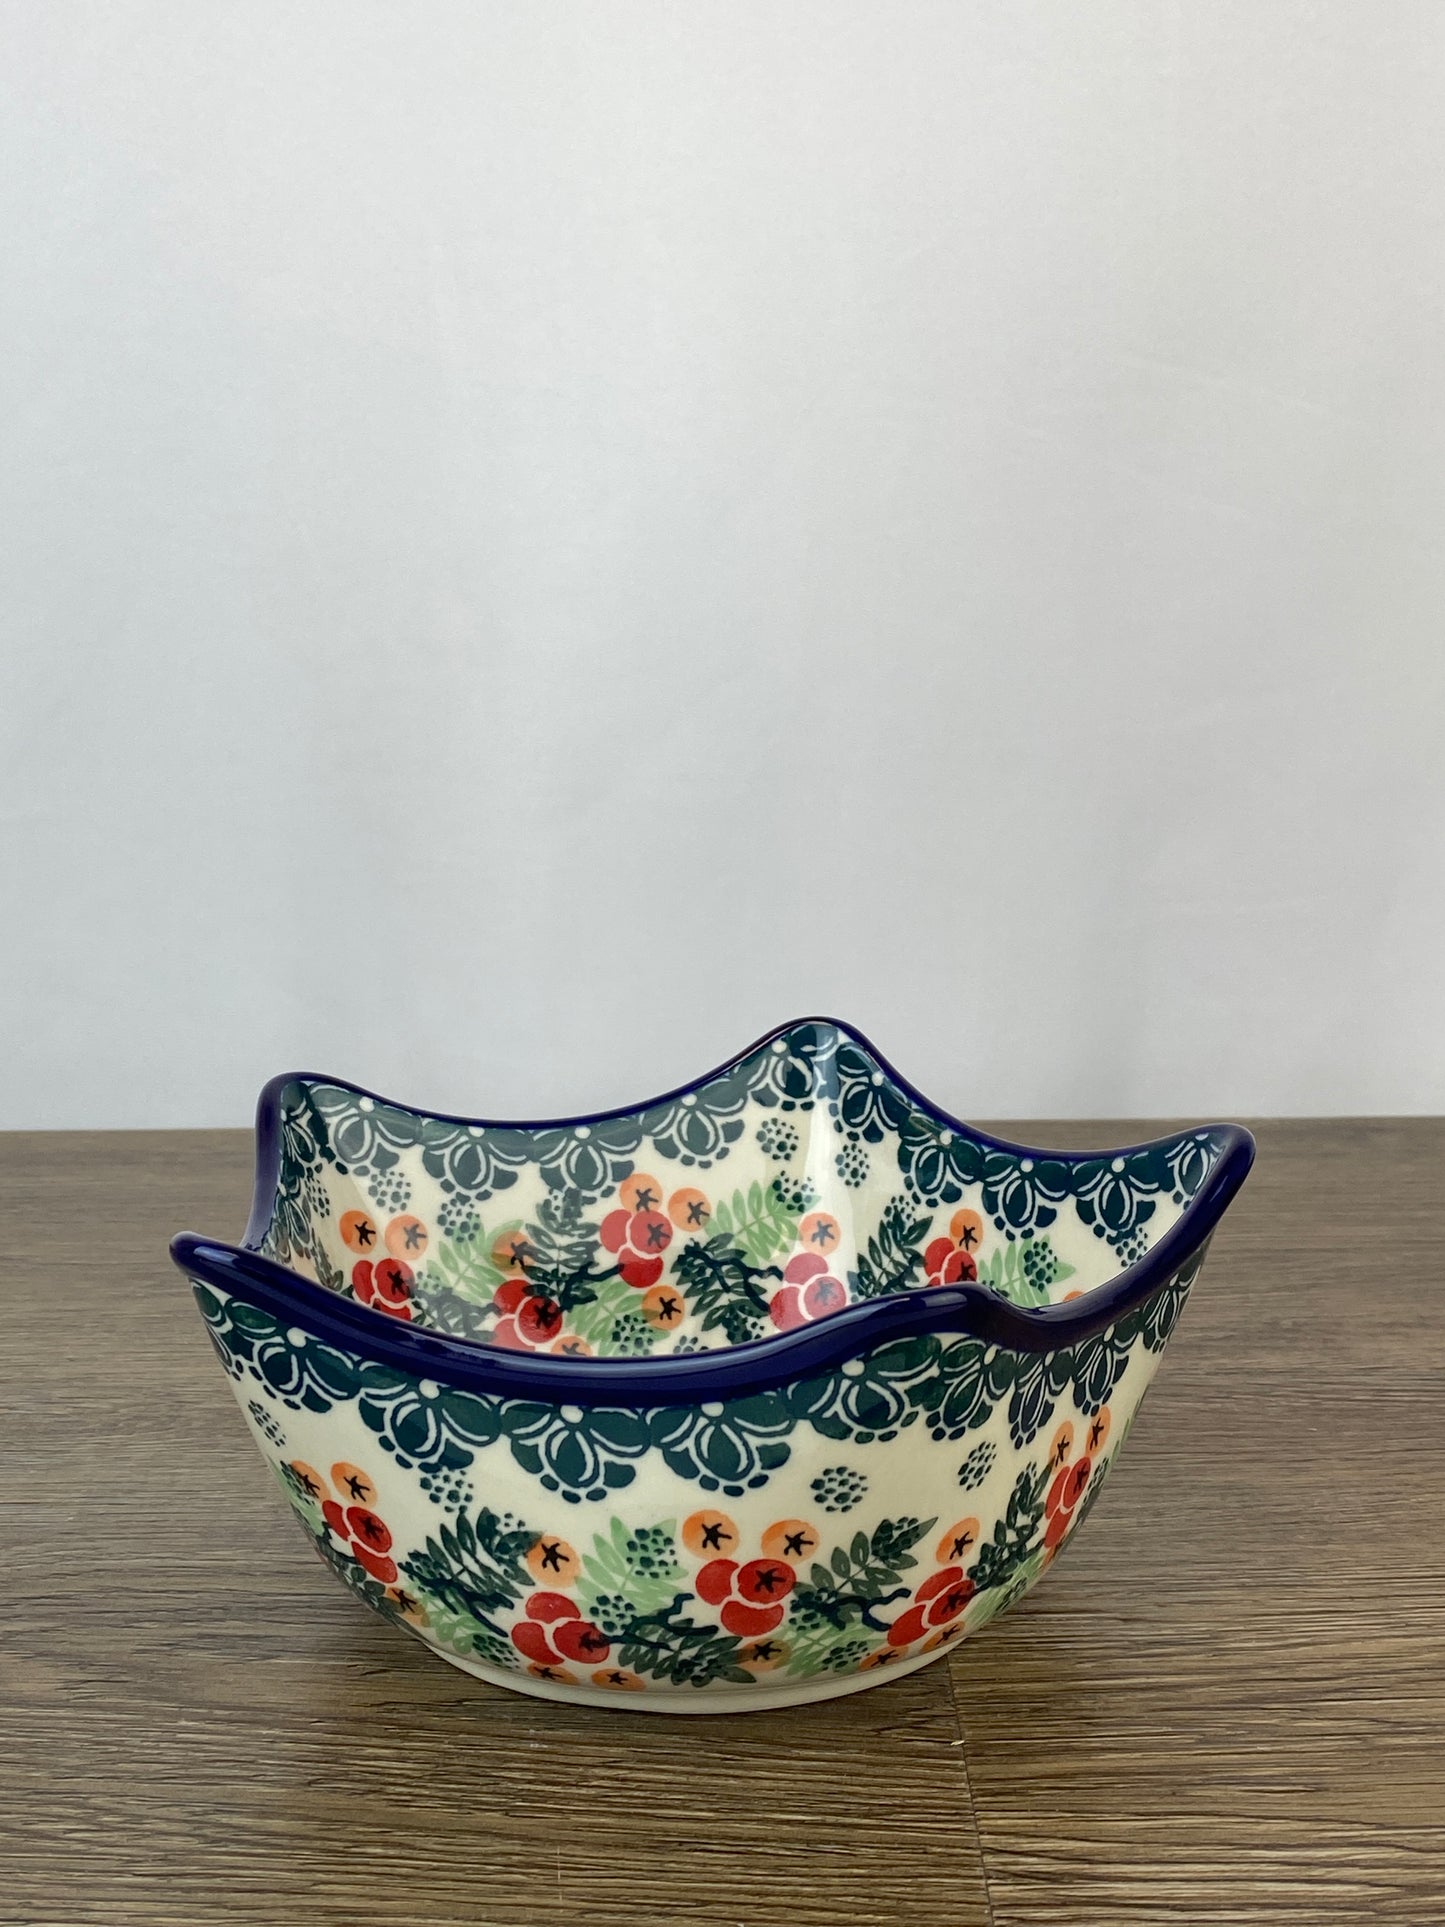 SALE Five Pointed Bowl - Shape 814 - Pattern 1414